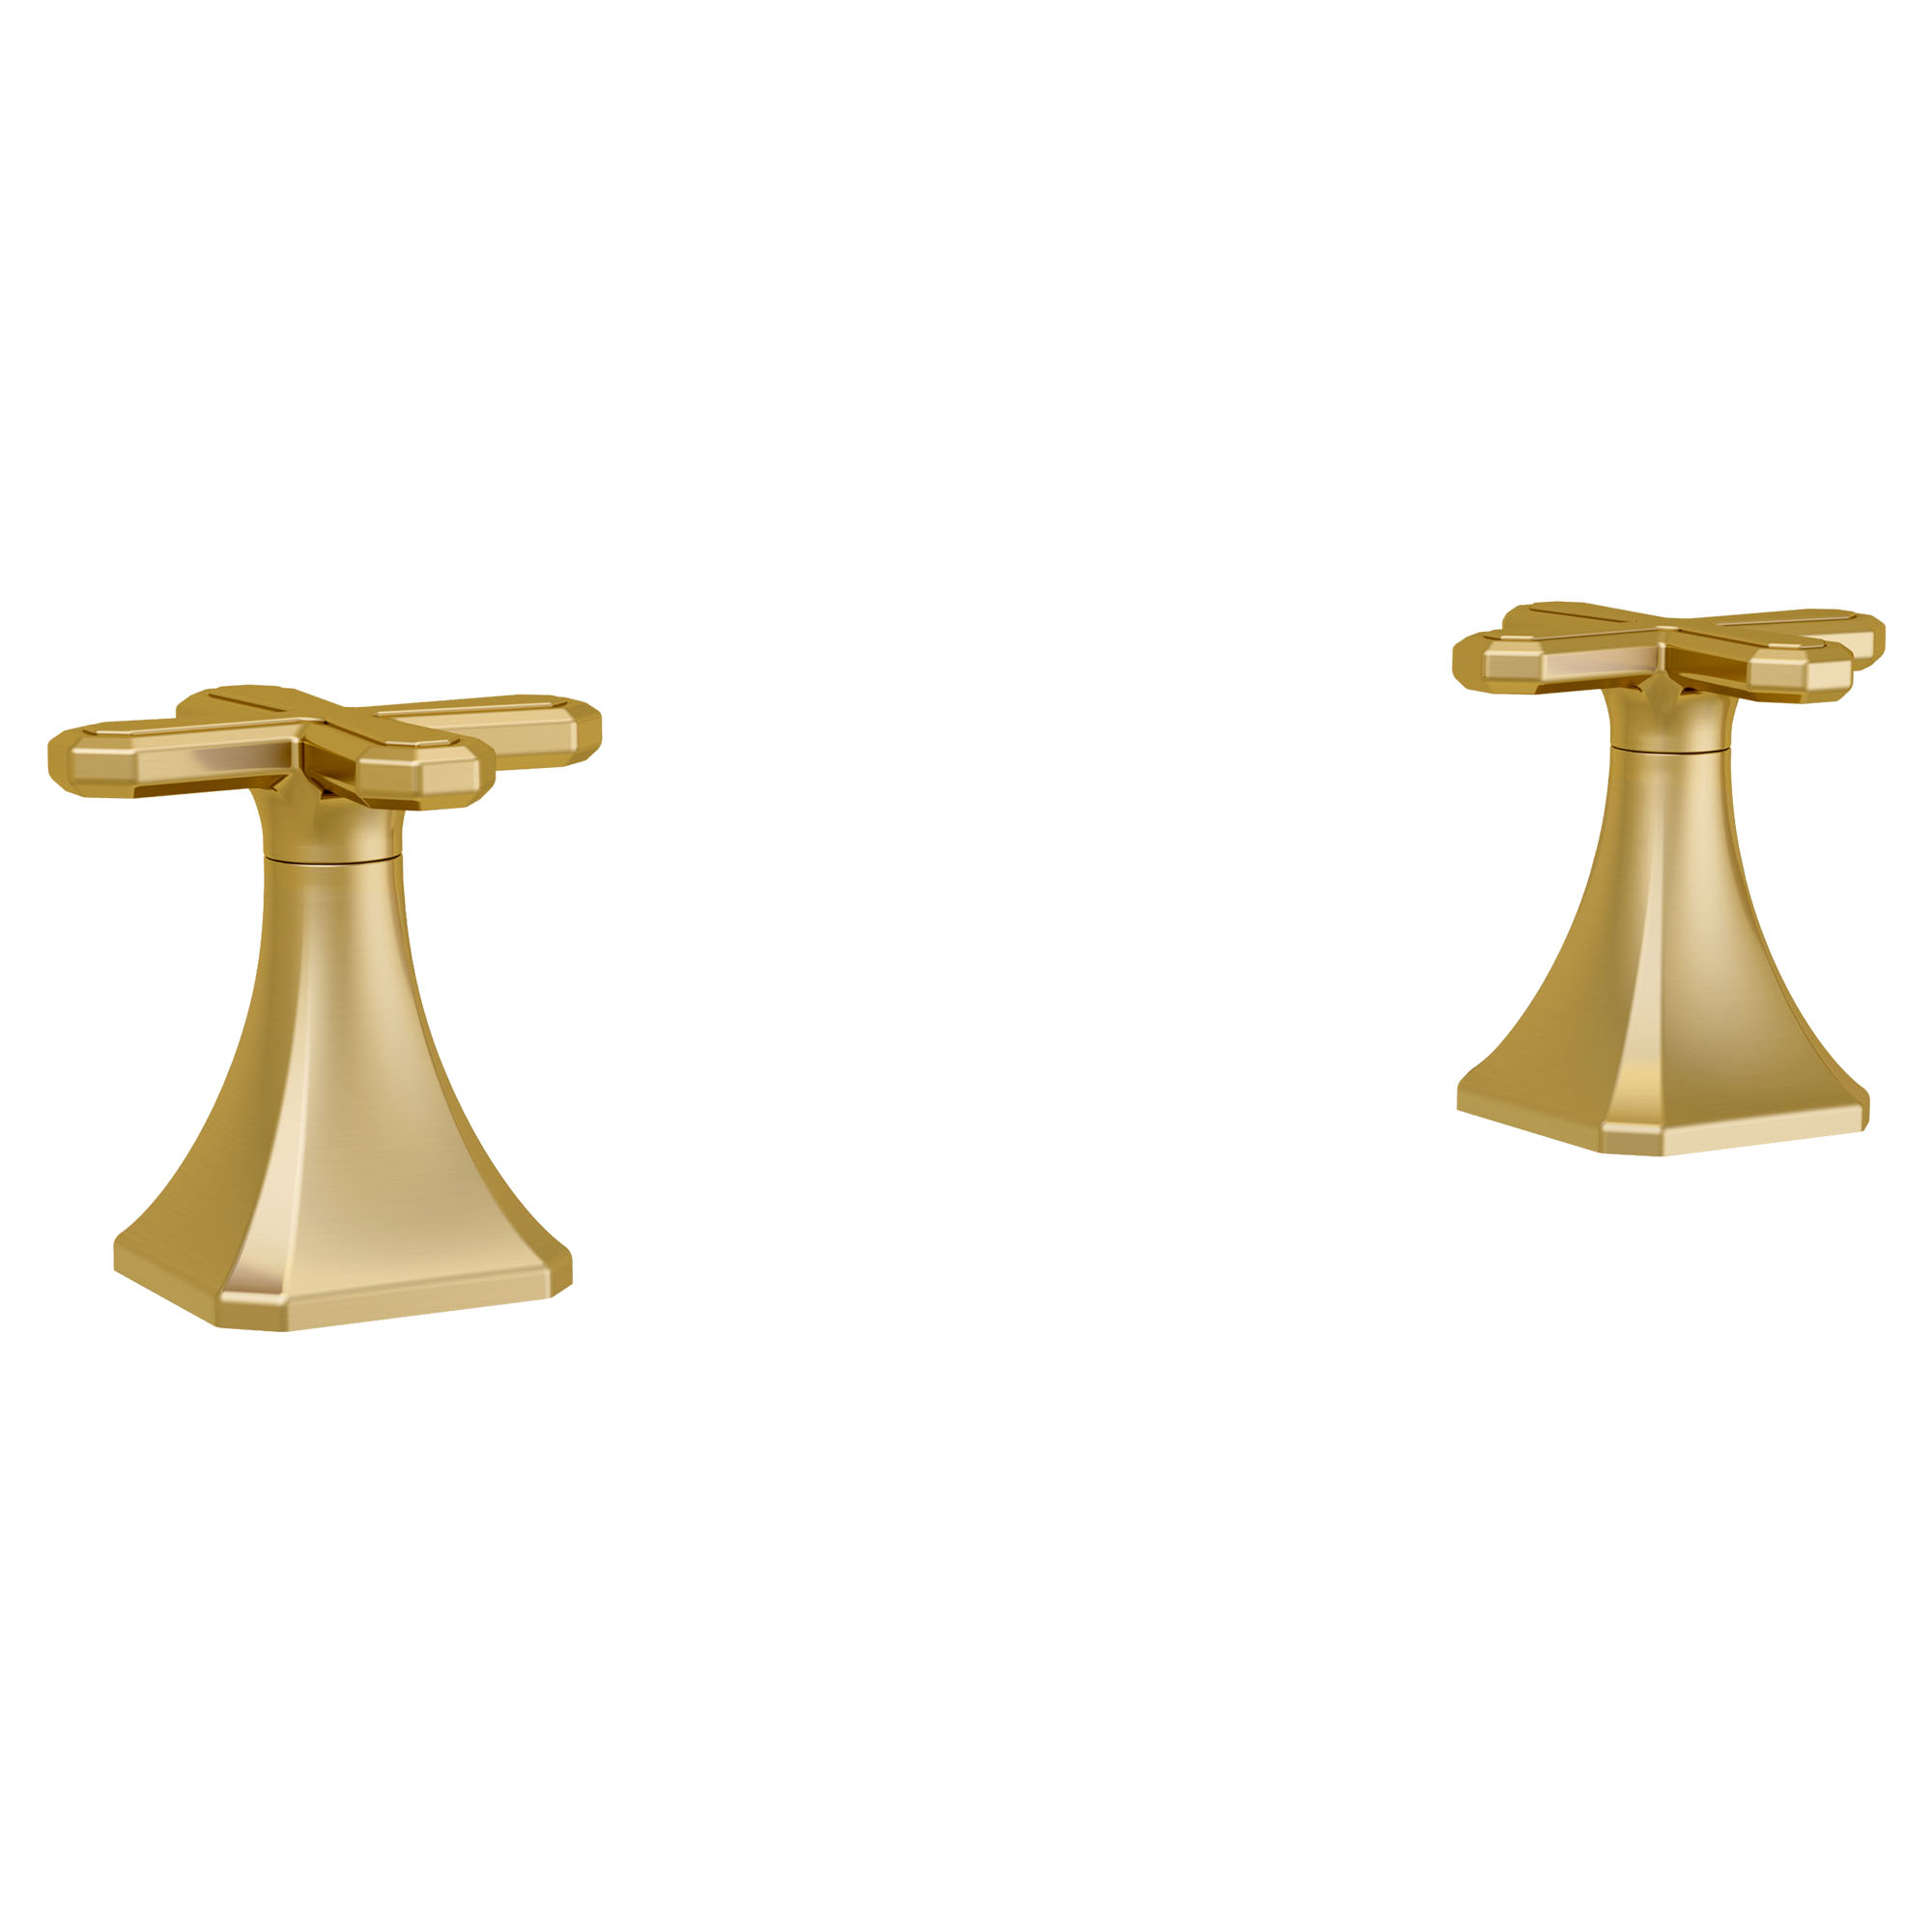 Belshire™ Cross Handles Only for Widespread Bathroom Faucet